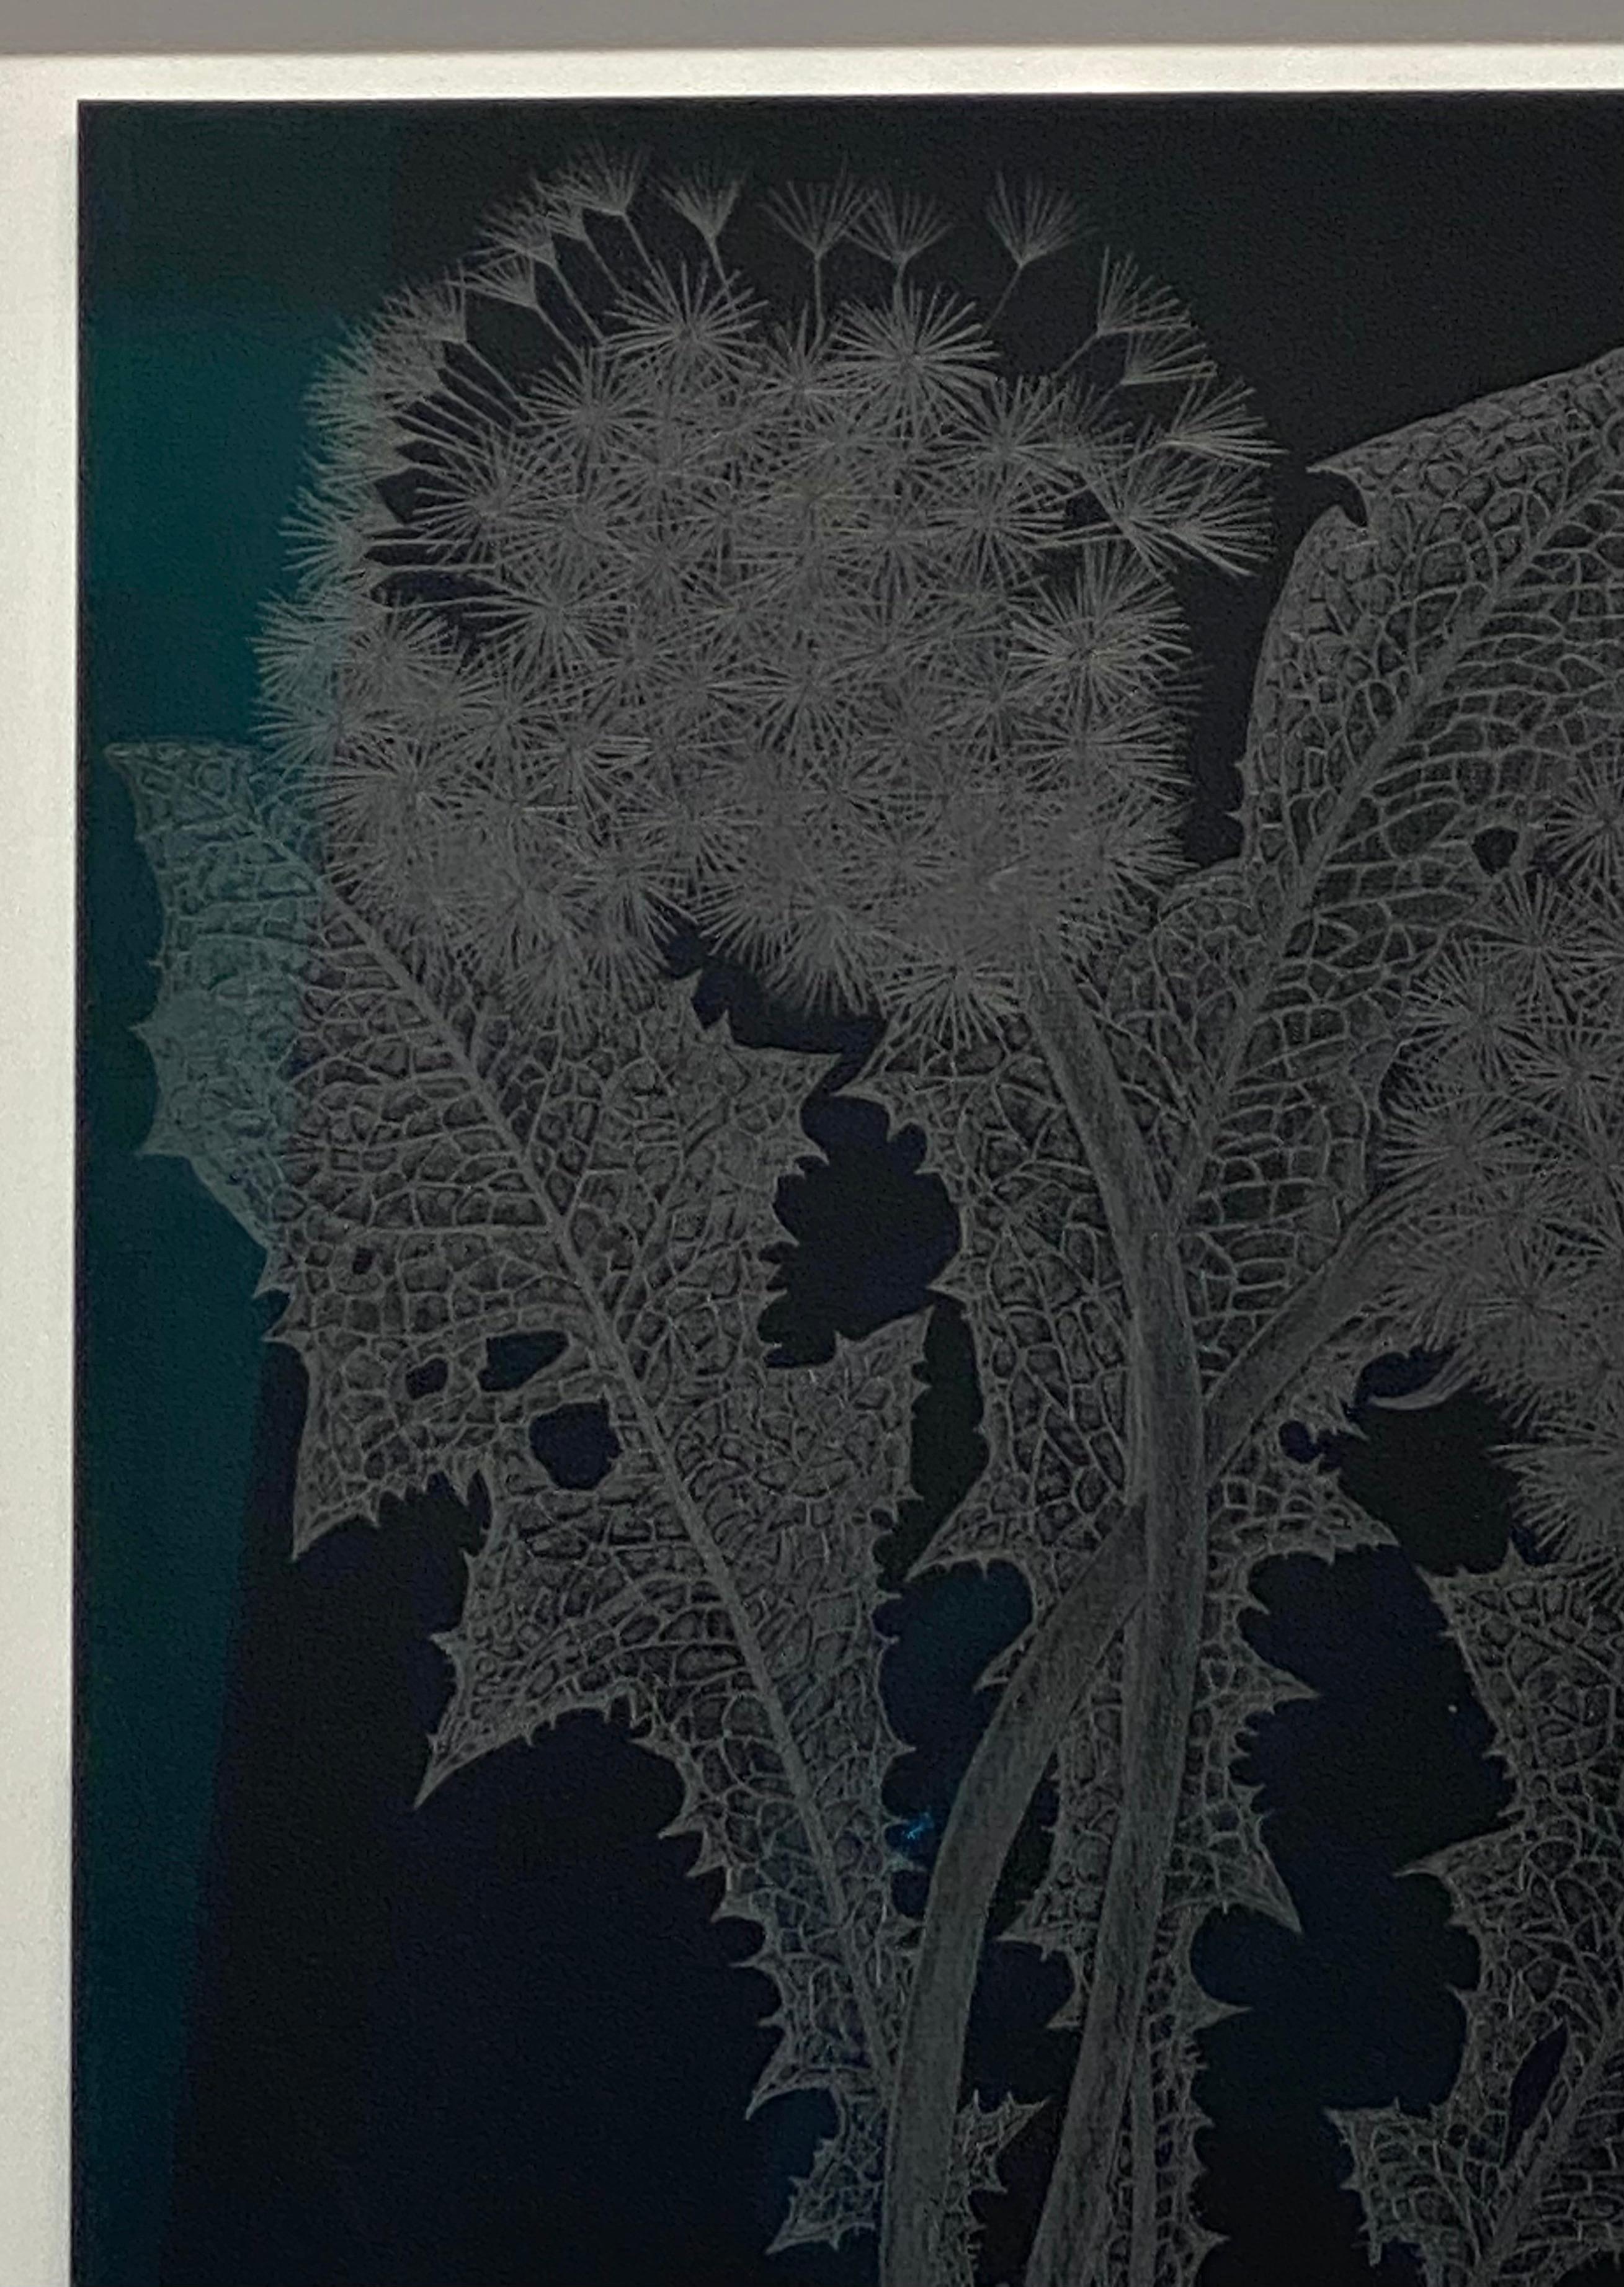 This delicate silver botanical drawing is made with graphite on painted black paper. The exploration of ephemerality, and the fragility of dandelions, and the plant's texture and movement, are the focus of this series by Margot Glass. The exquisite